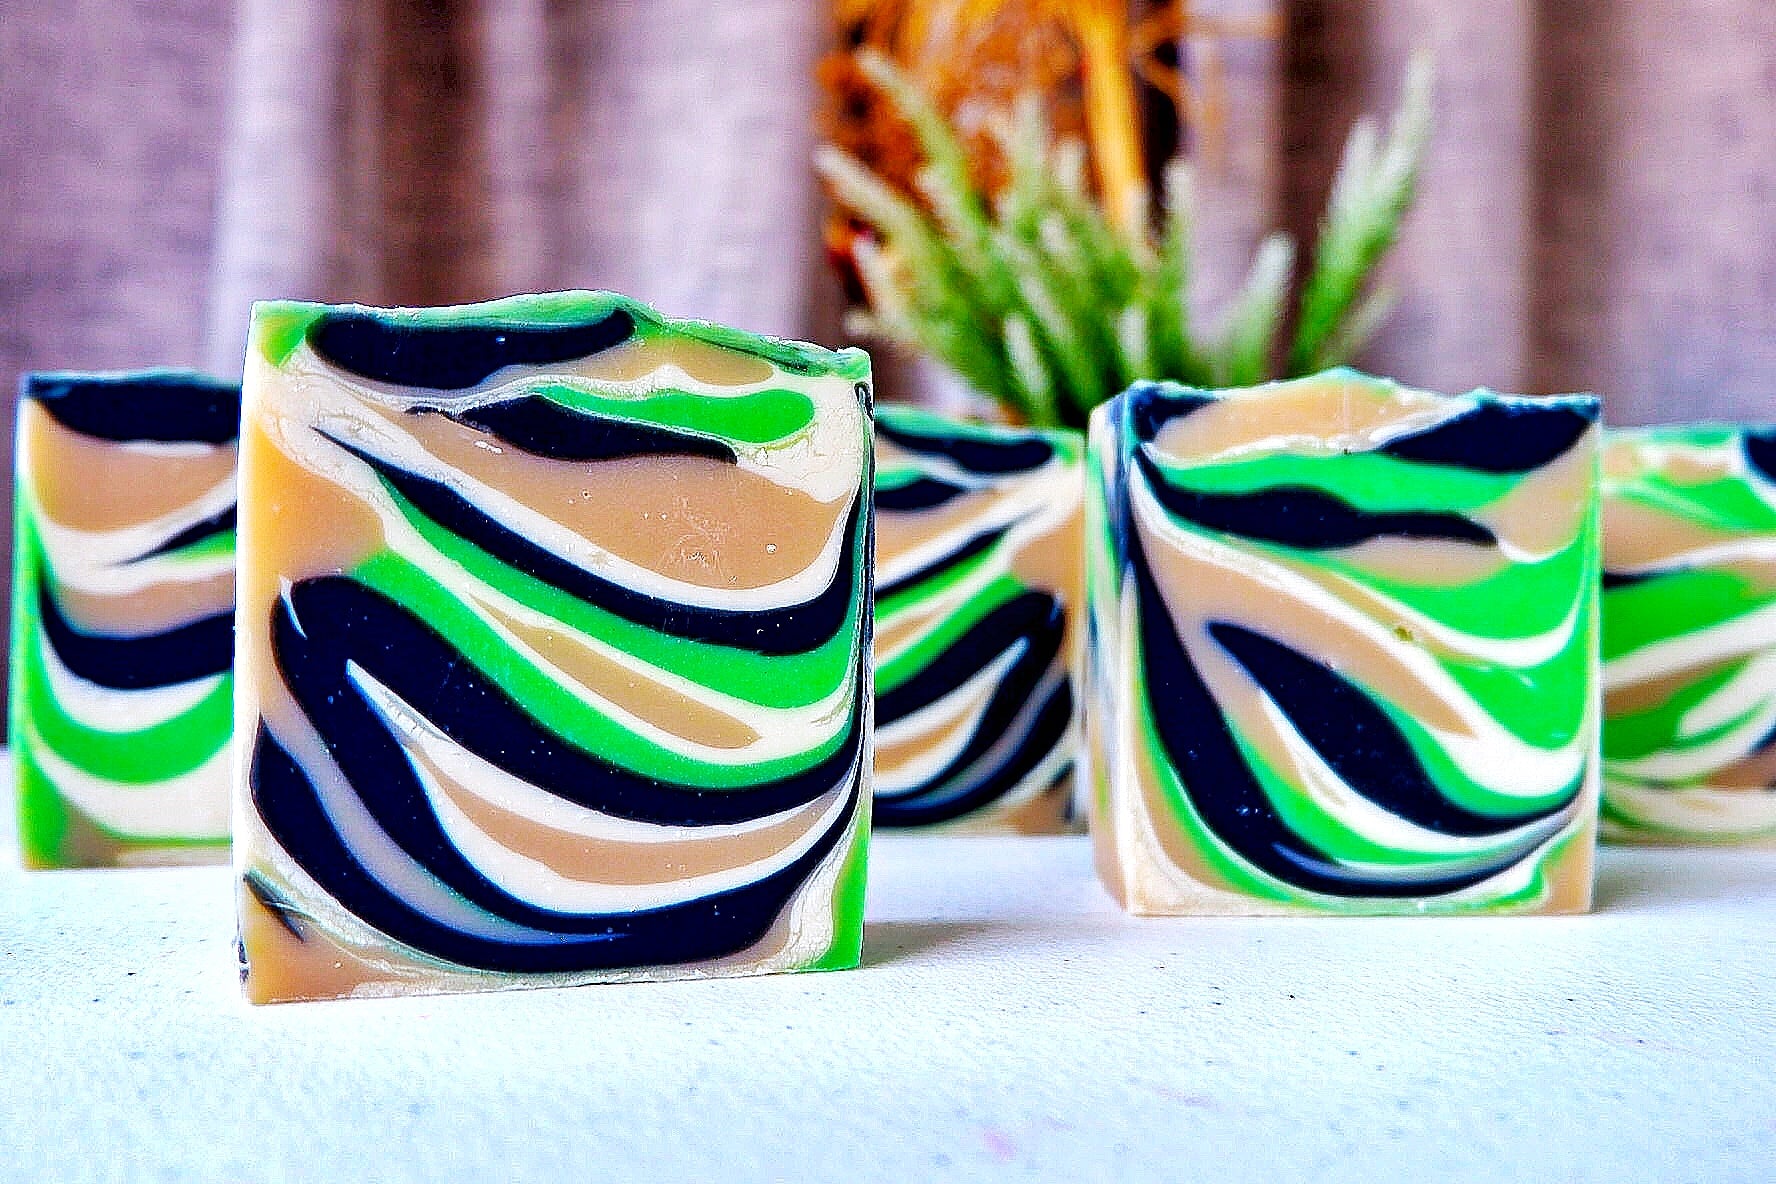 Camo Natural Artisanal Soap | Scented